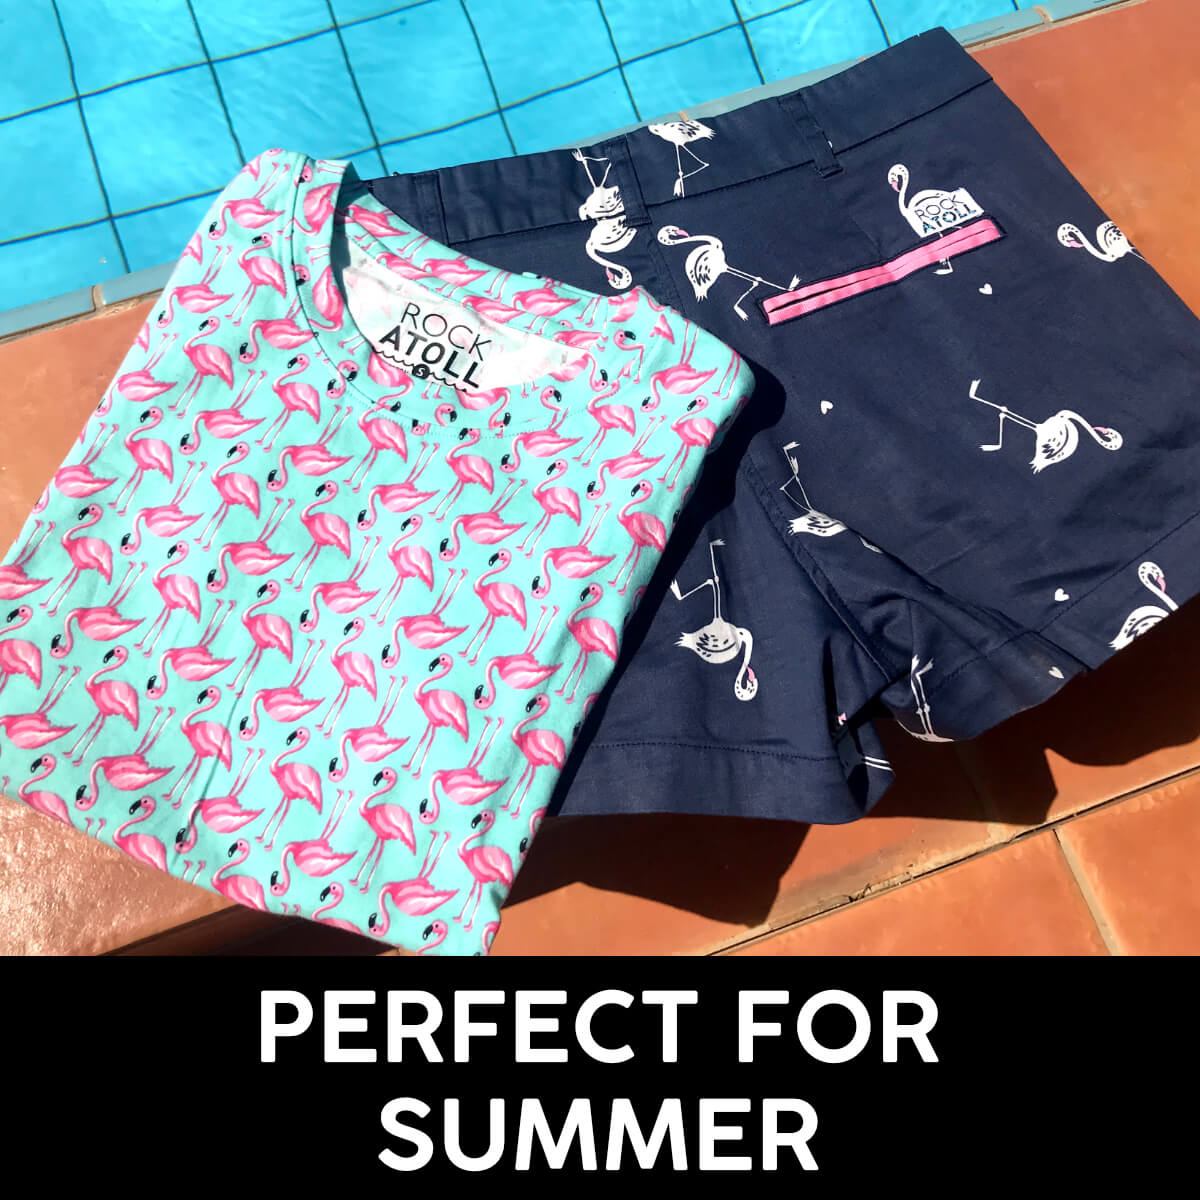 The Perfect Summer Shorts You Never Knew You Needed. Fun All-Over Novelty Prints, Bold Colors, Perfect Fit.